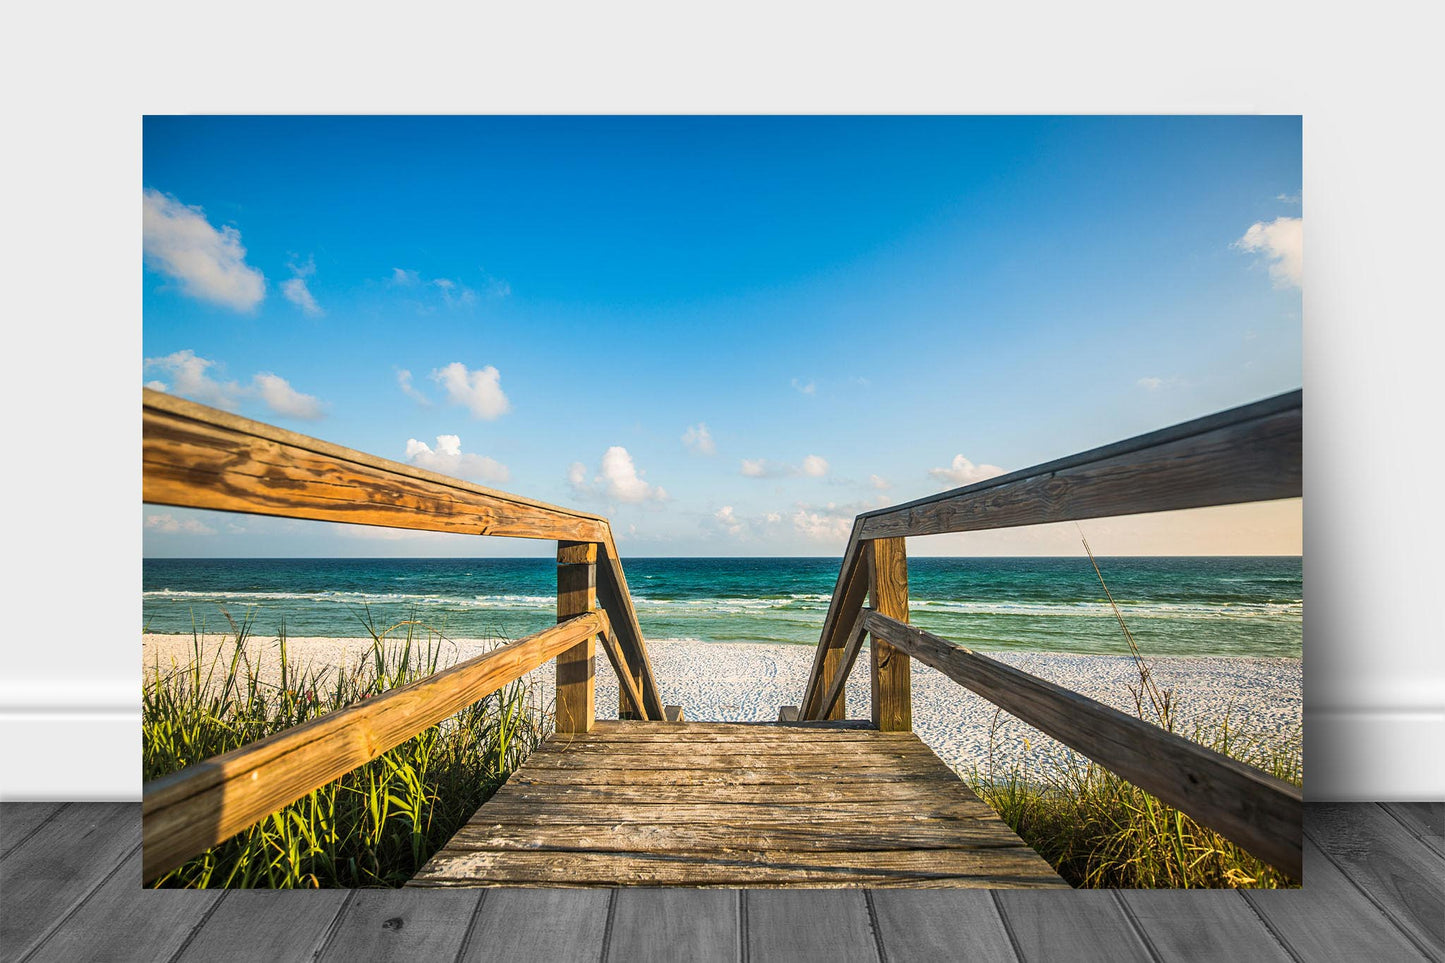 Coastal metal print on aluminum of a sandy boardwalk leading to the emerald waters of the Gulf Coast near Destin, Florida by Sean Ramsey of Southern Plains Photography.